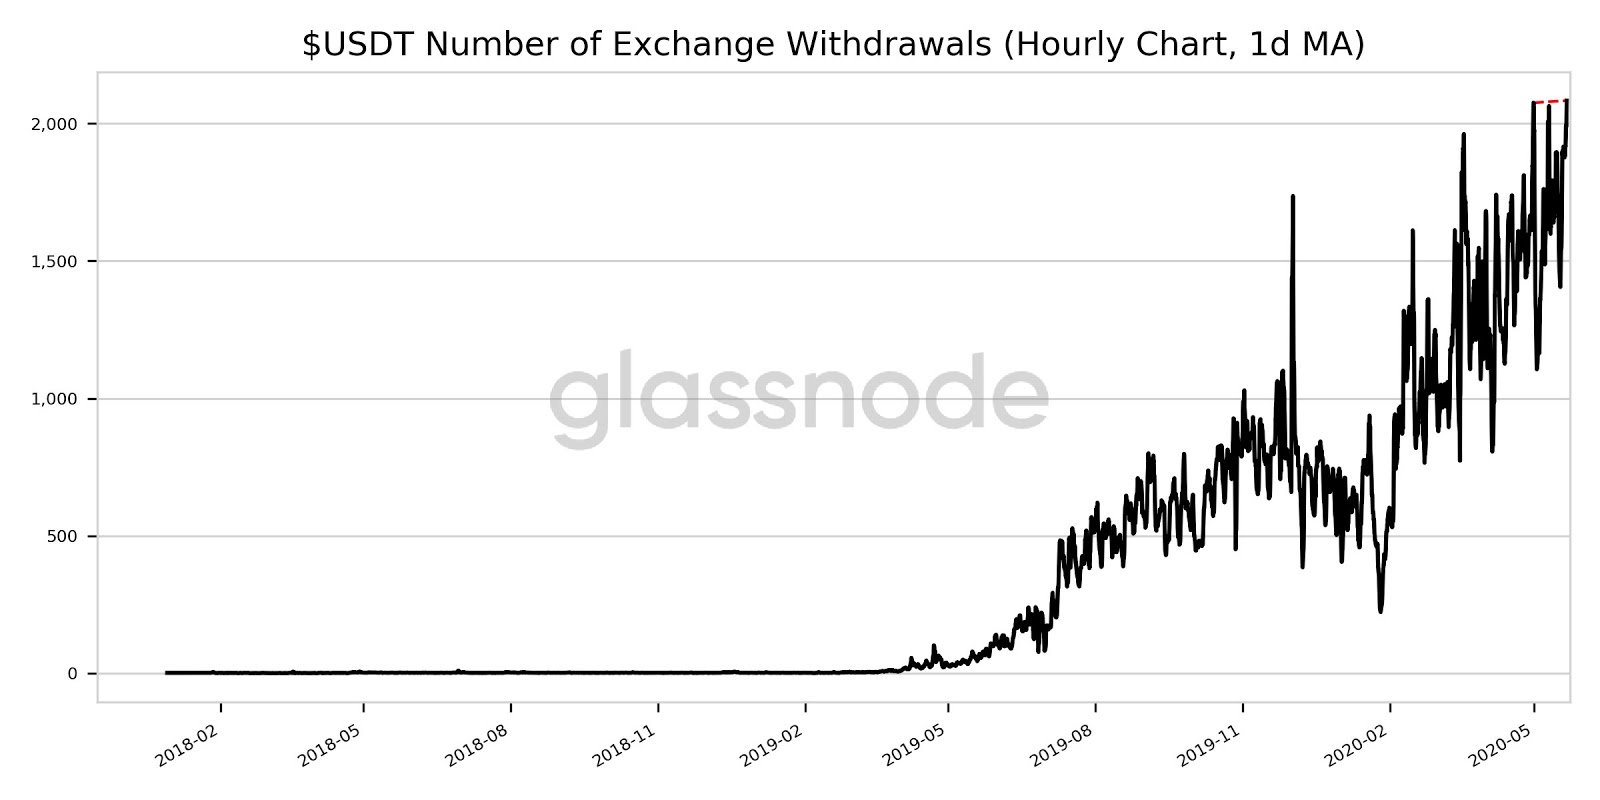 Outflow of Tether (USDT) from cryptocurrency exchanges. Source: glassnode